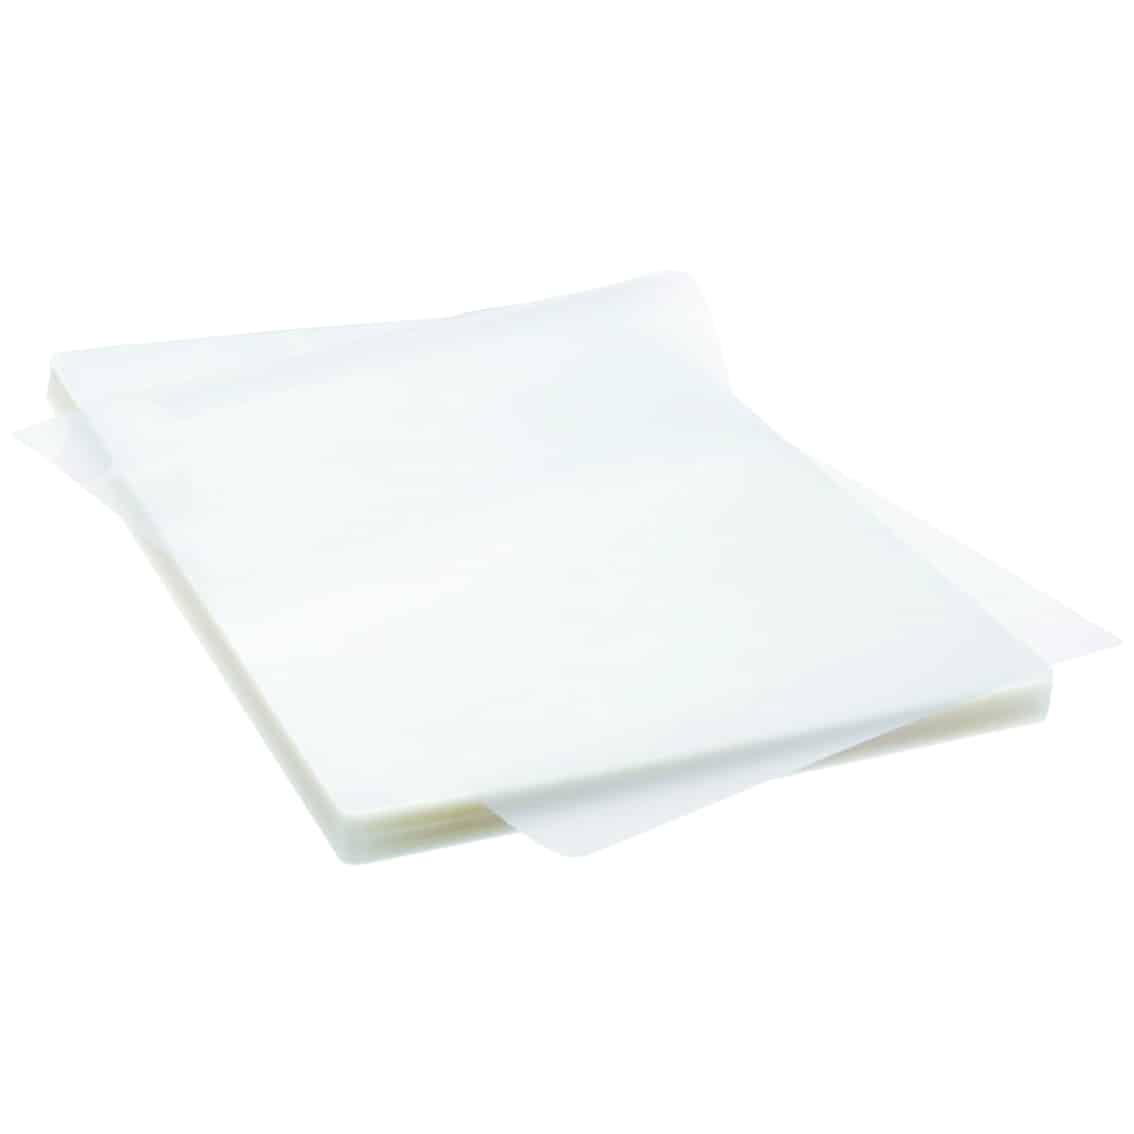 Shop All Type of A4 Laminating Pouches Australia